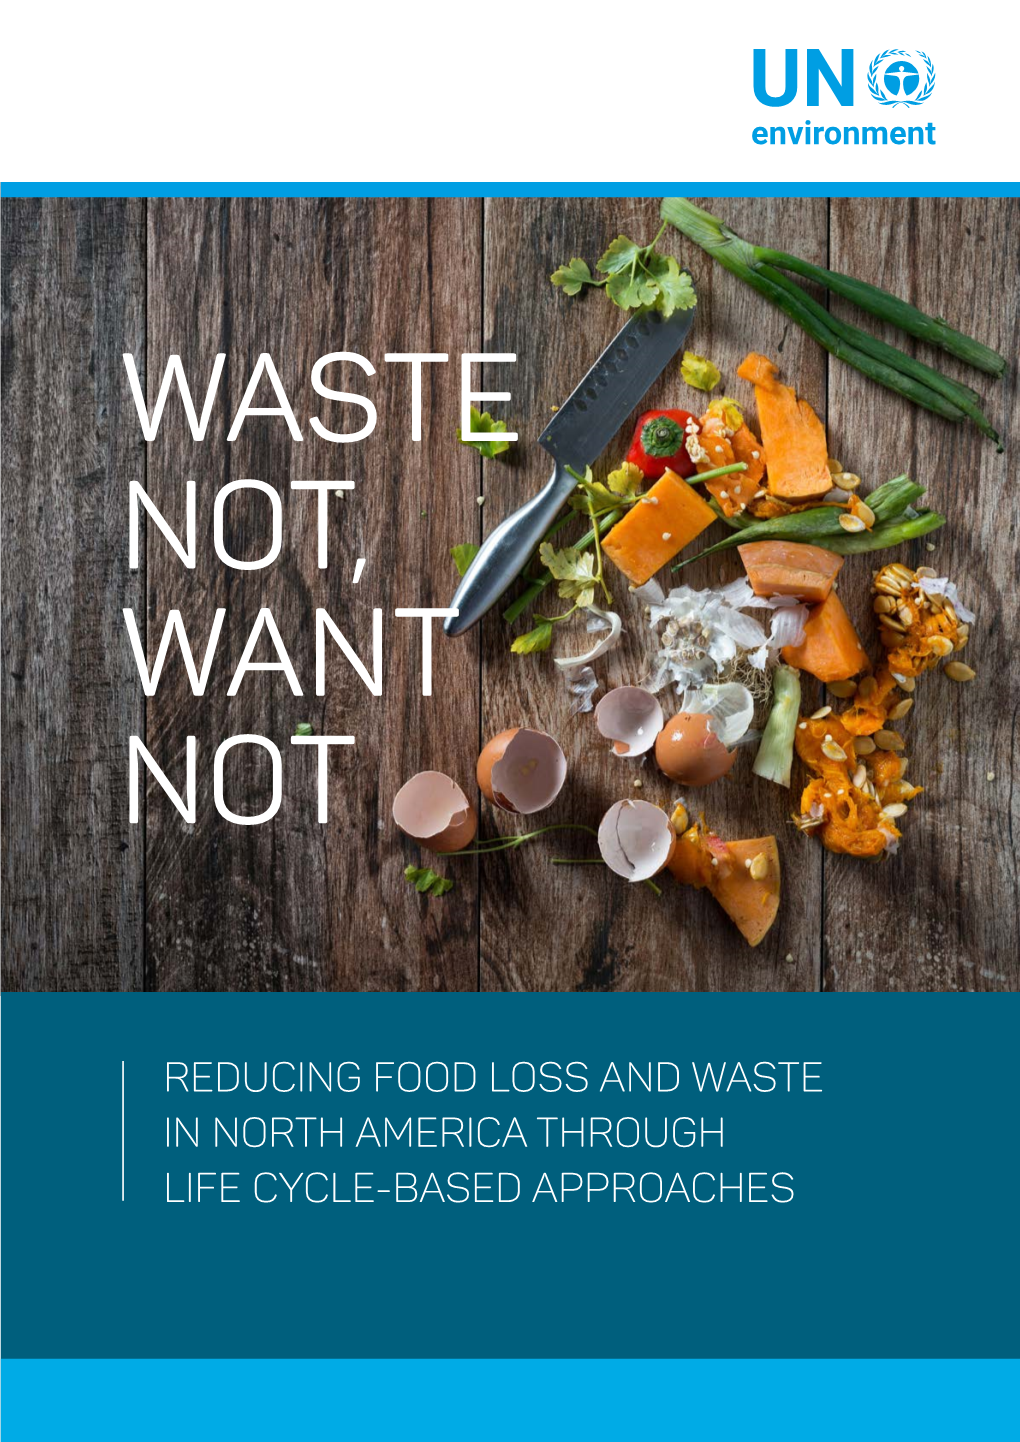 REDUCING FOOD LOSS and WASTE in NORTH AMERICA THROUGH LIFE CYCLE-BASED APPROACHES © United Nations Environment Programme, 2019